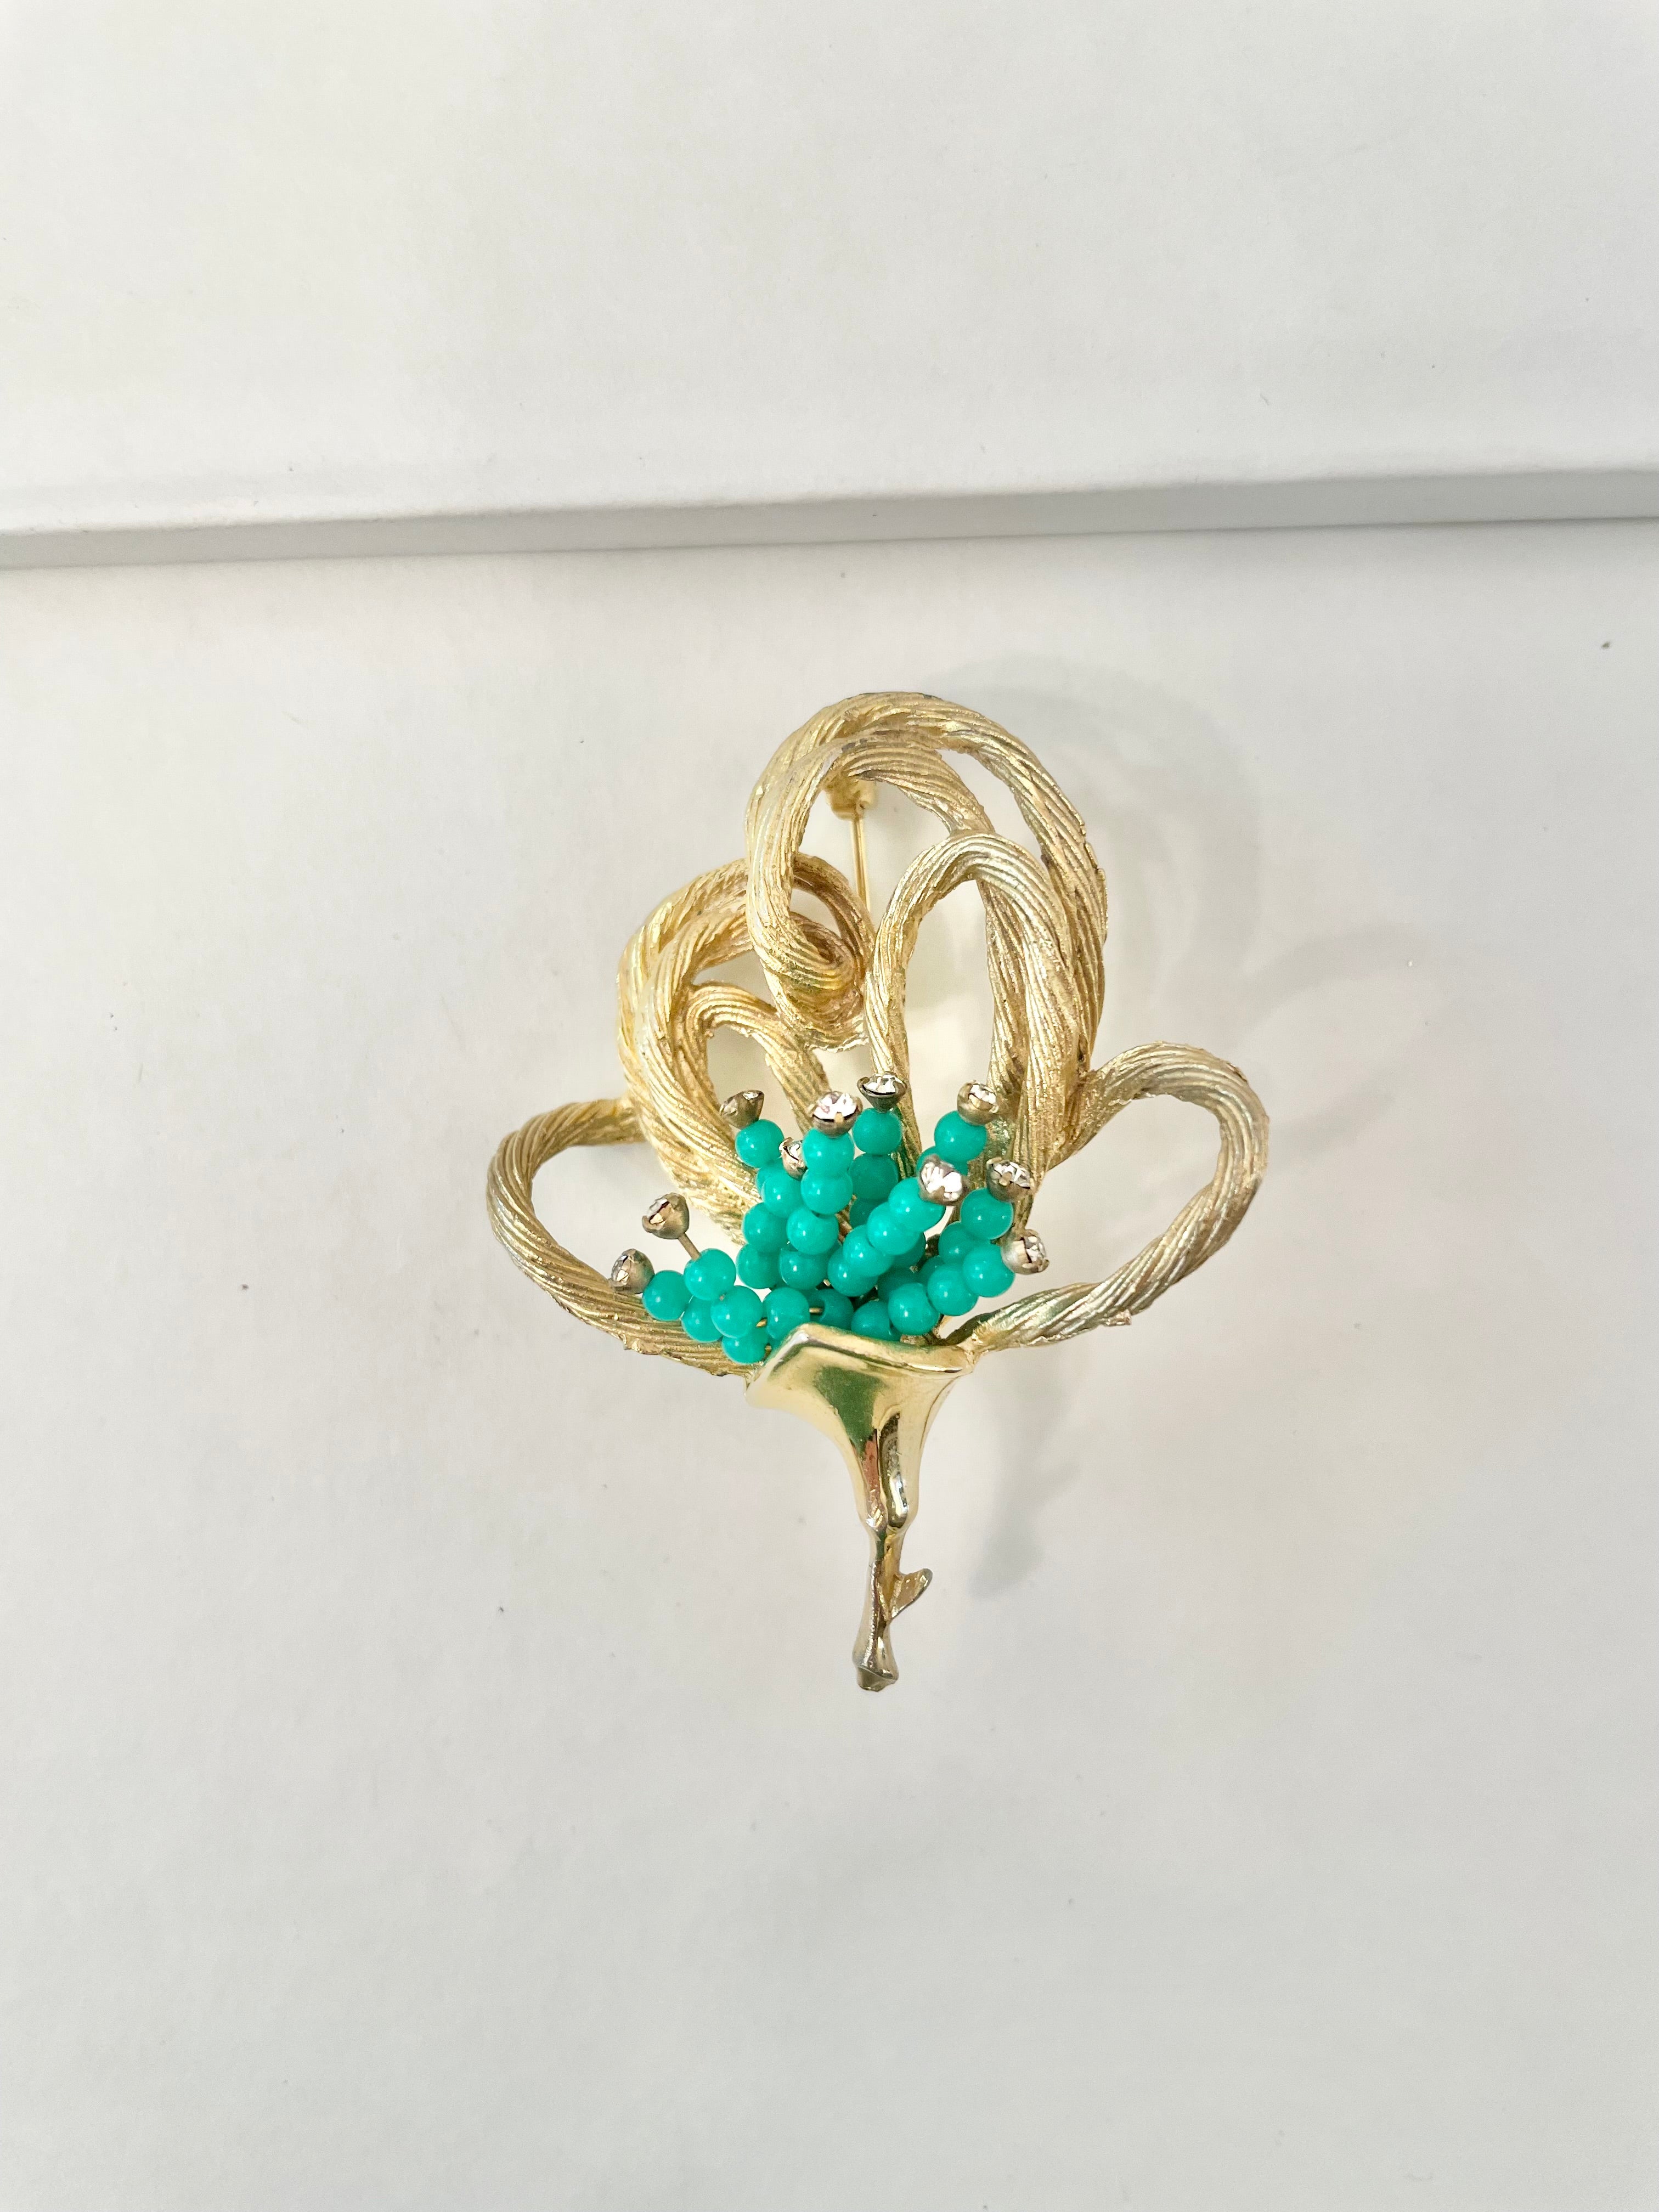 A truly classic brooch for a classy lady... love this bottle green beaded brooch with a sprig of clear glass stones, set in gold! so lovely